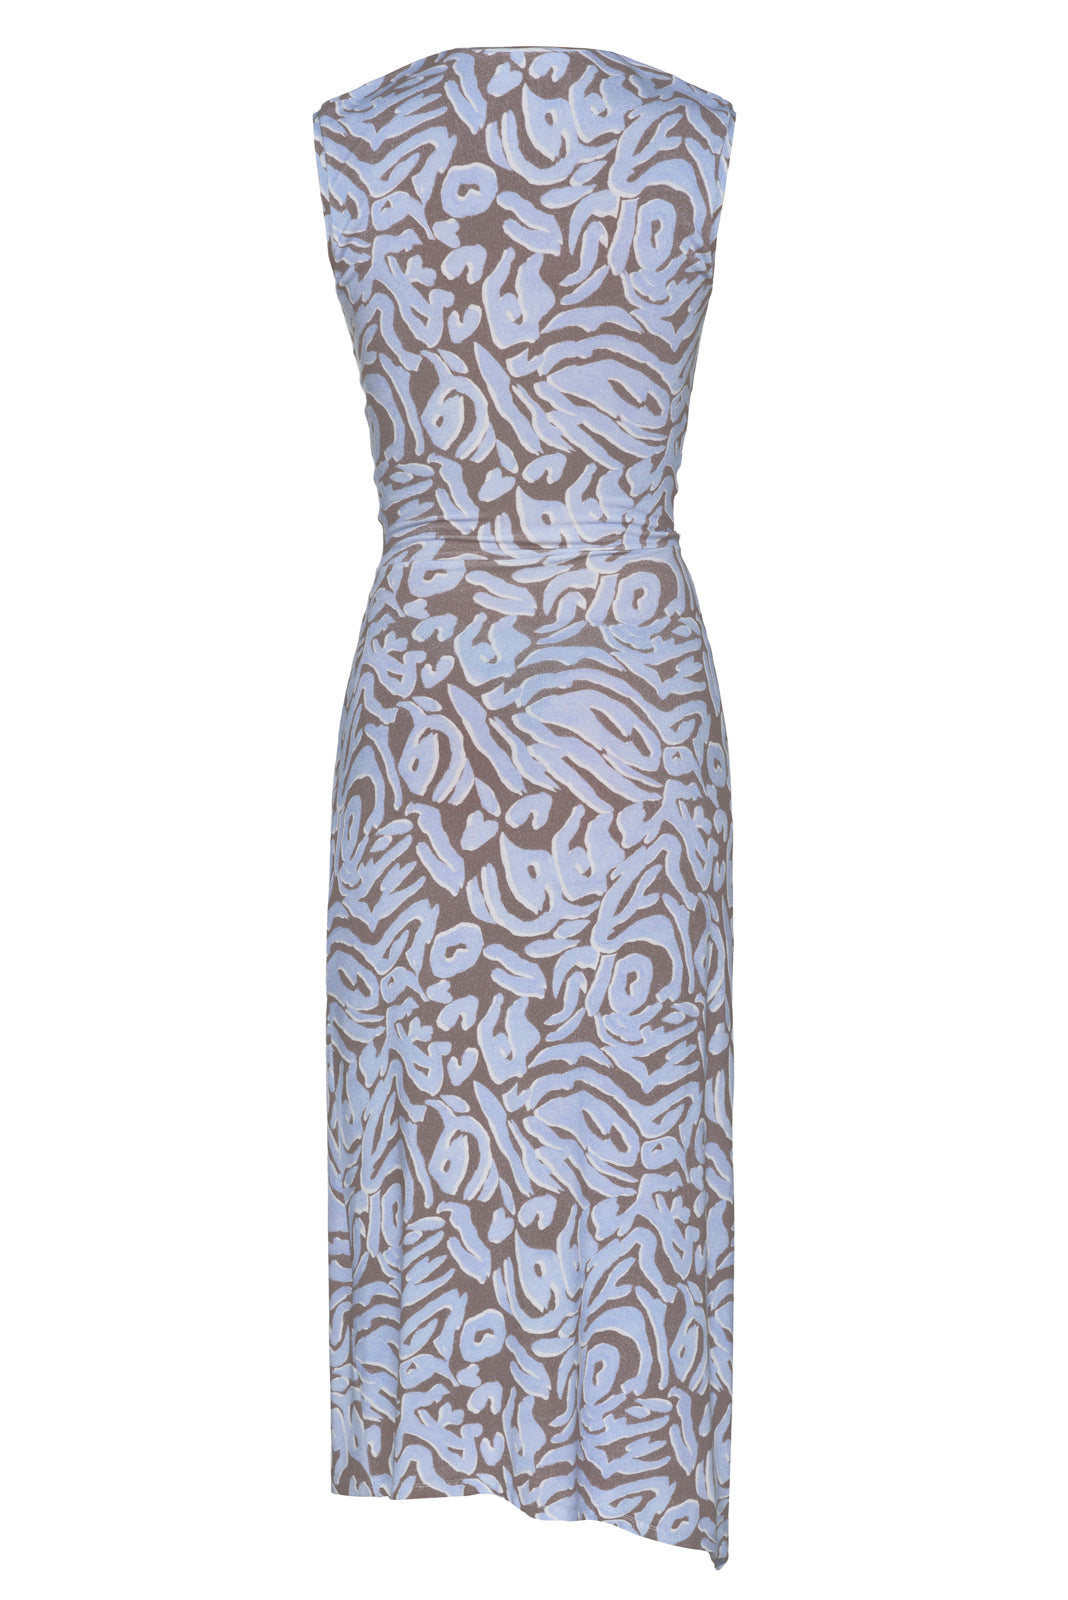 Cut Outs Printed Dress